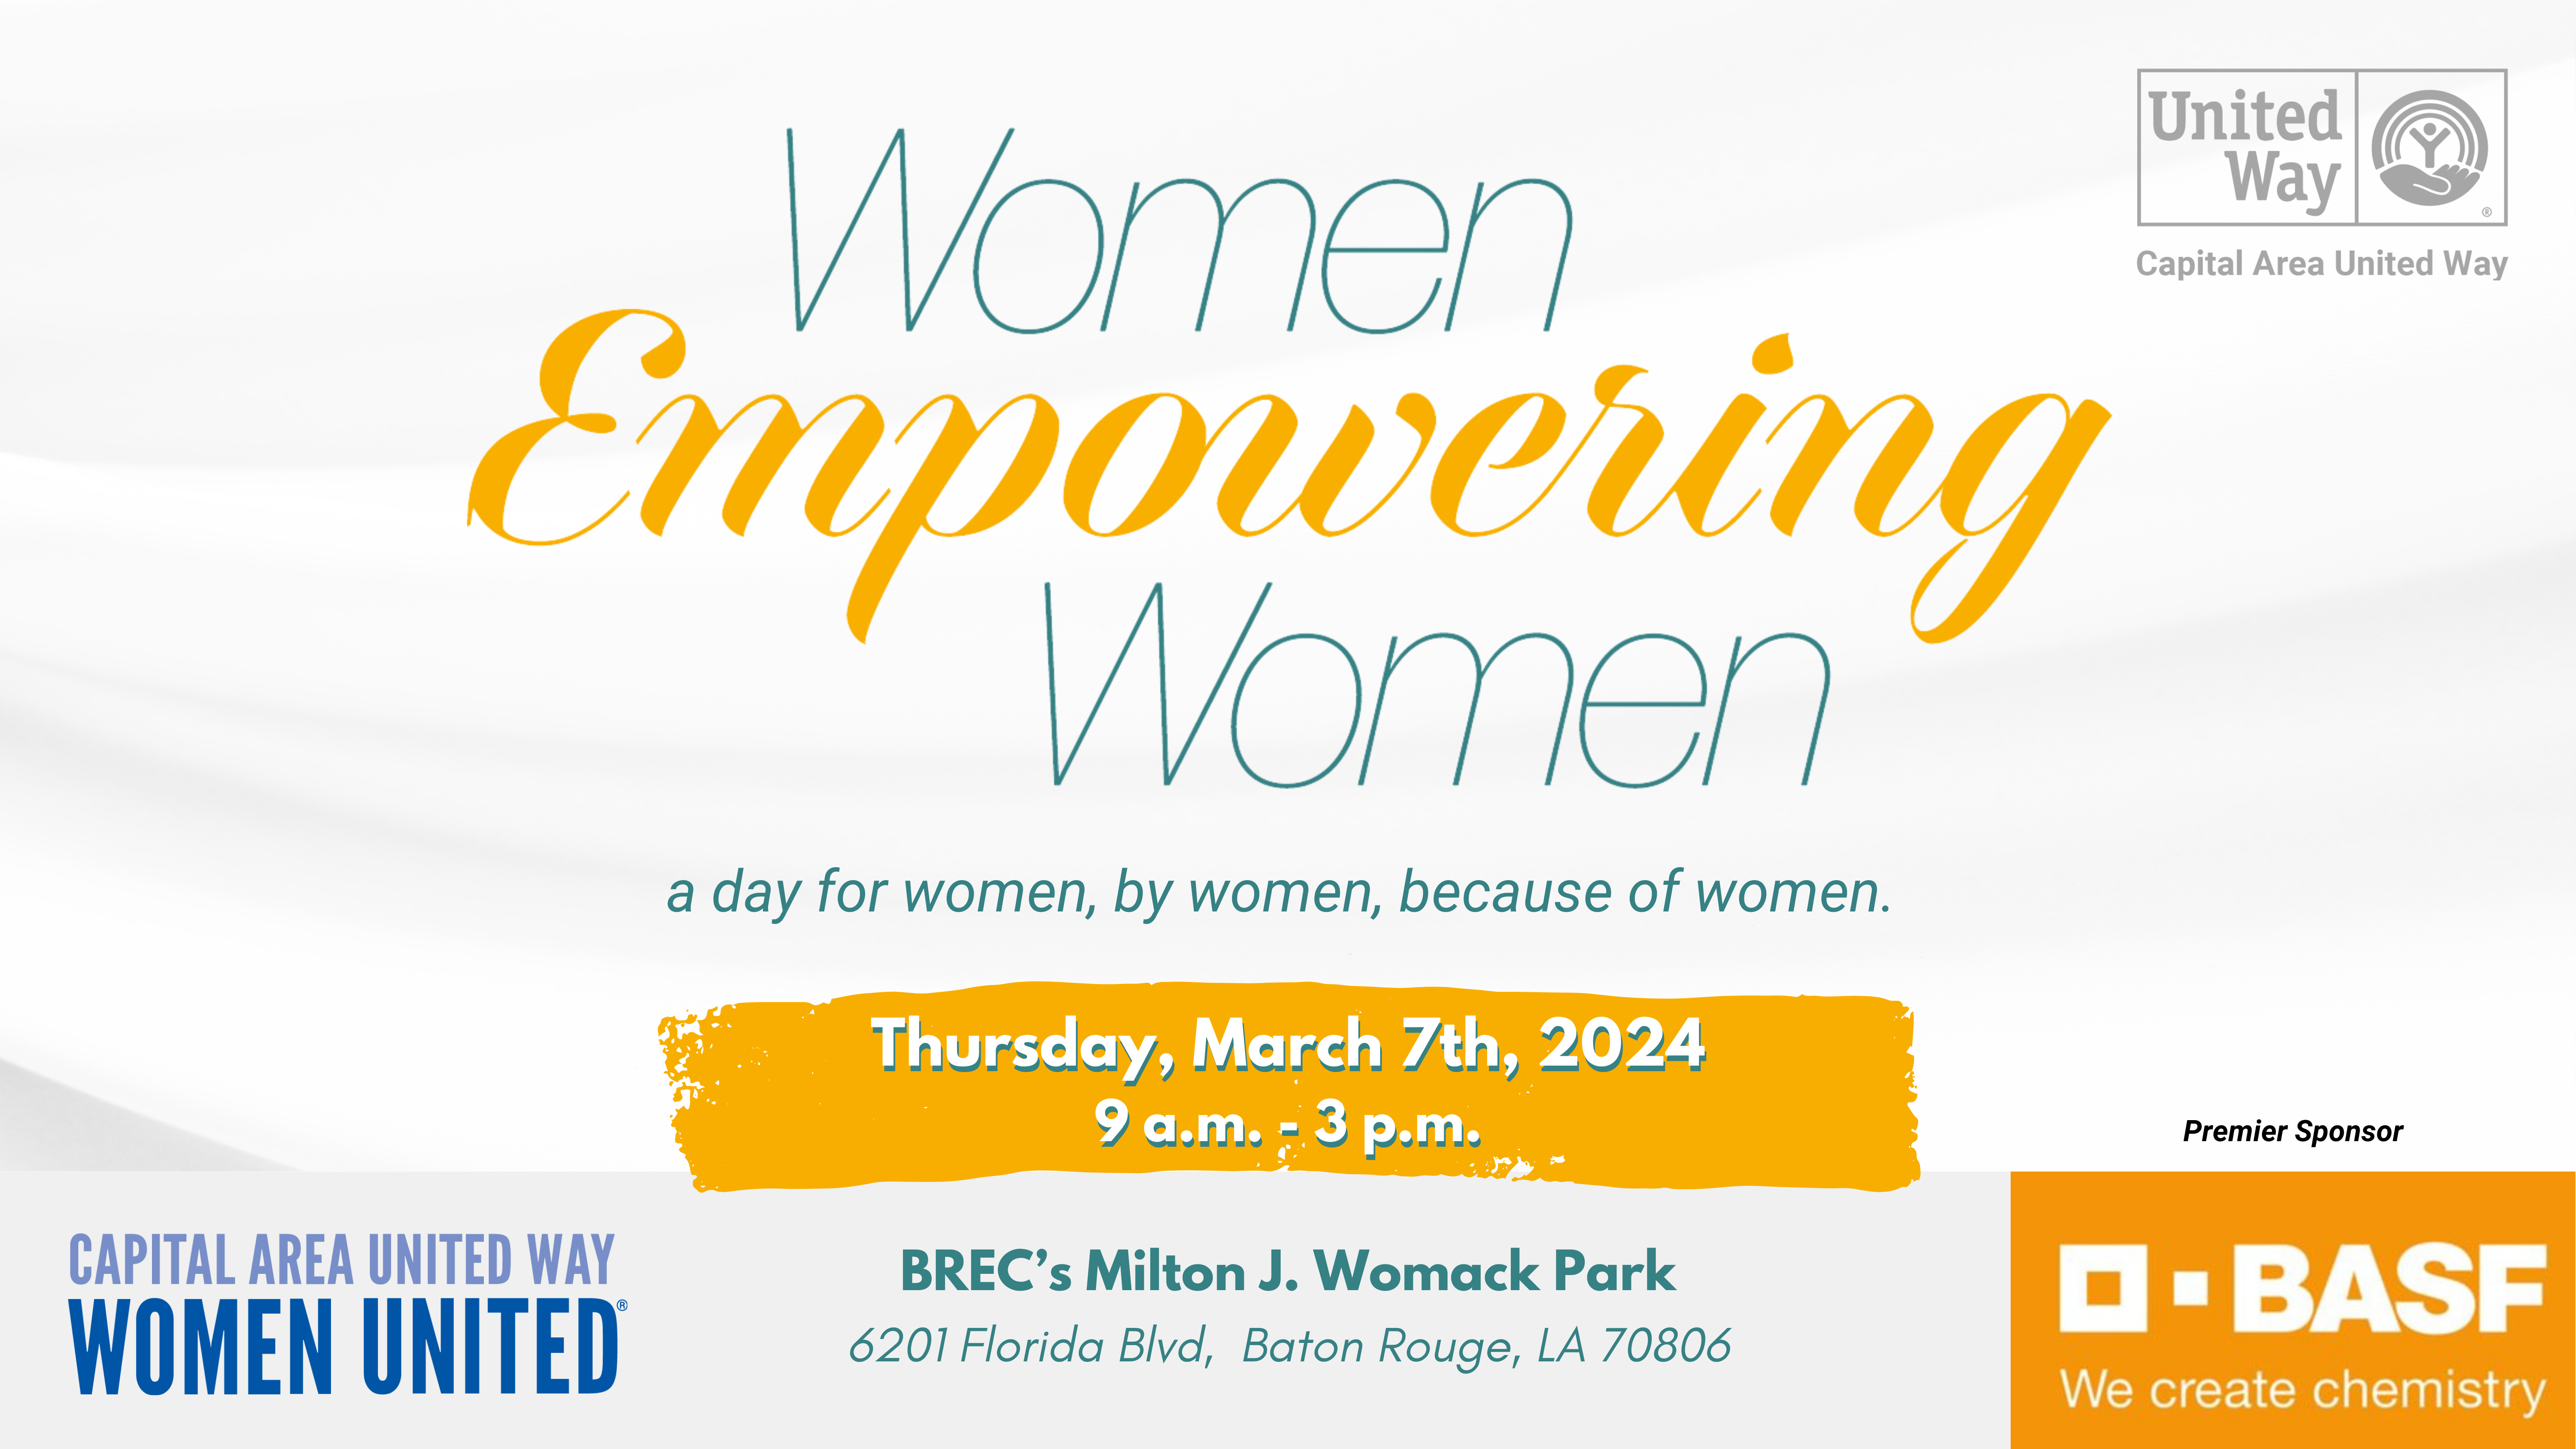 Save The Date for Women Empowering Women